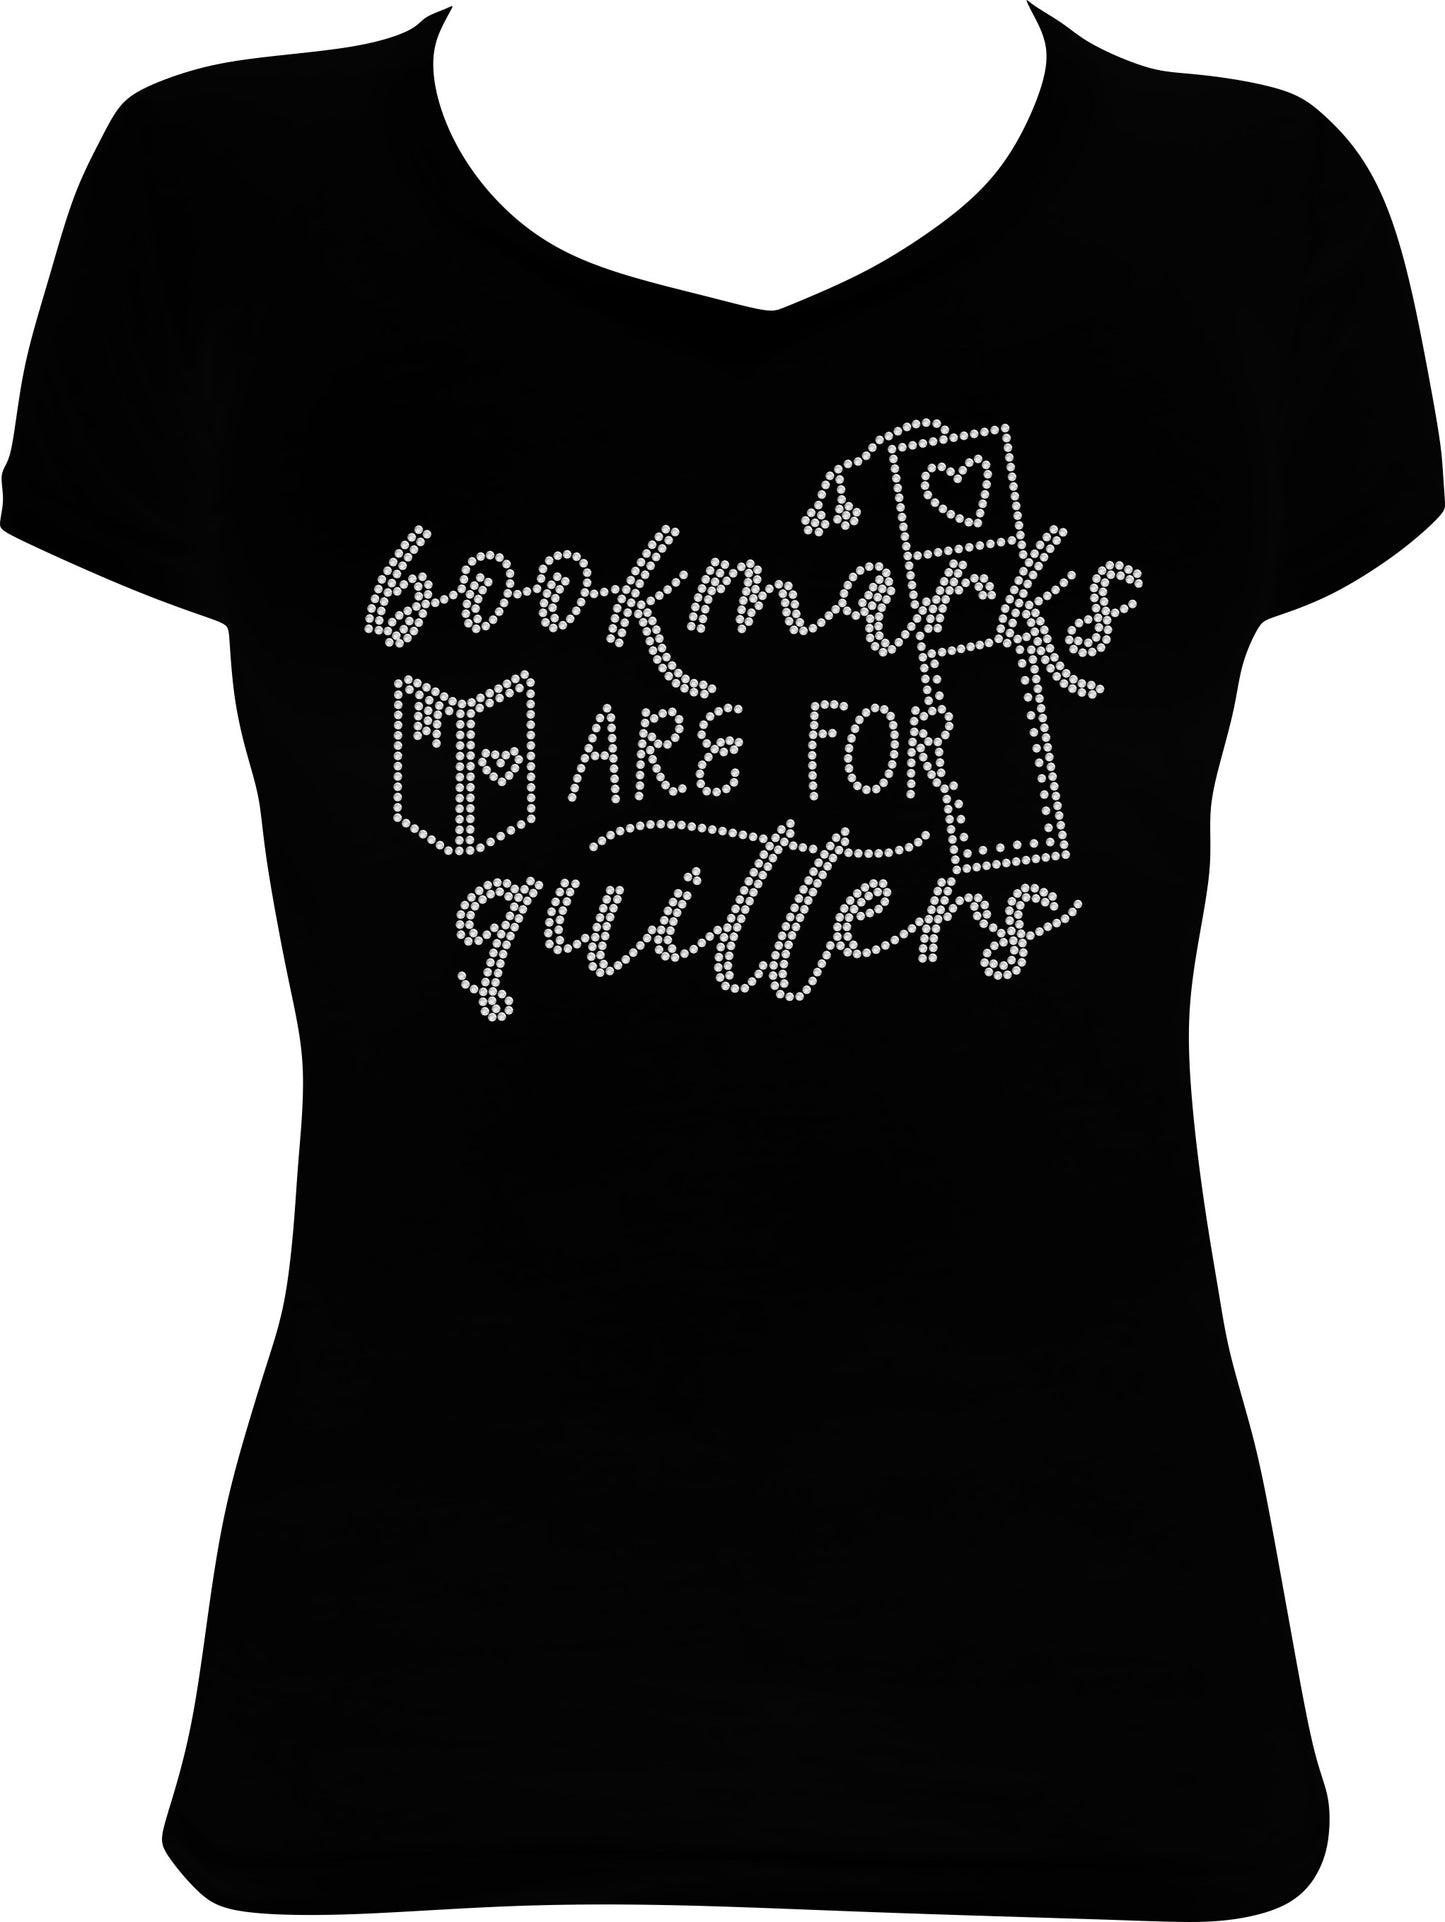 Bookmarks are for Quitters Rhinestone Shirt